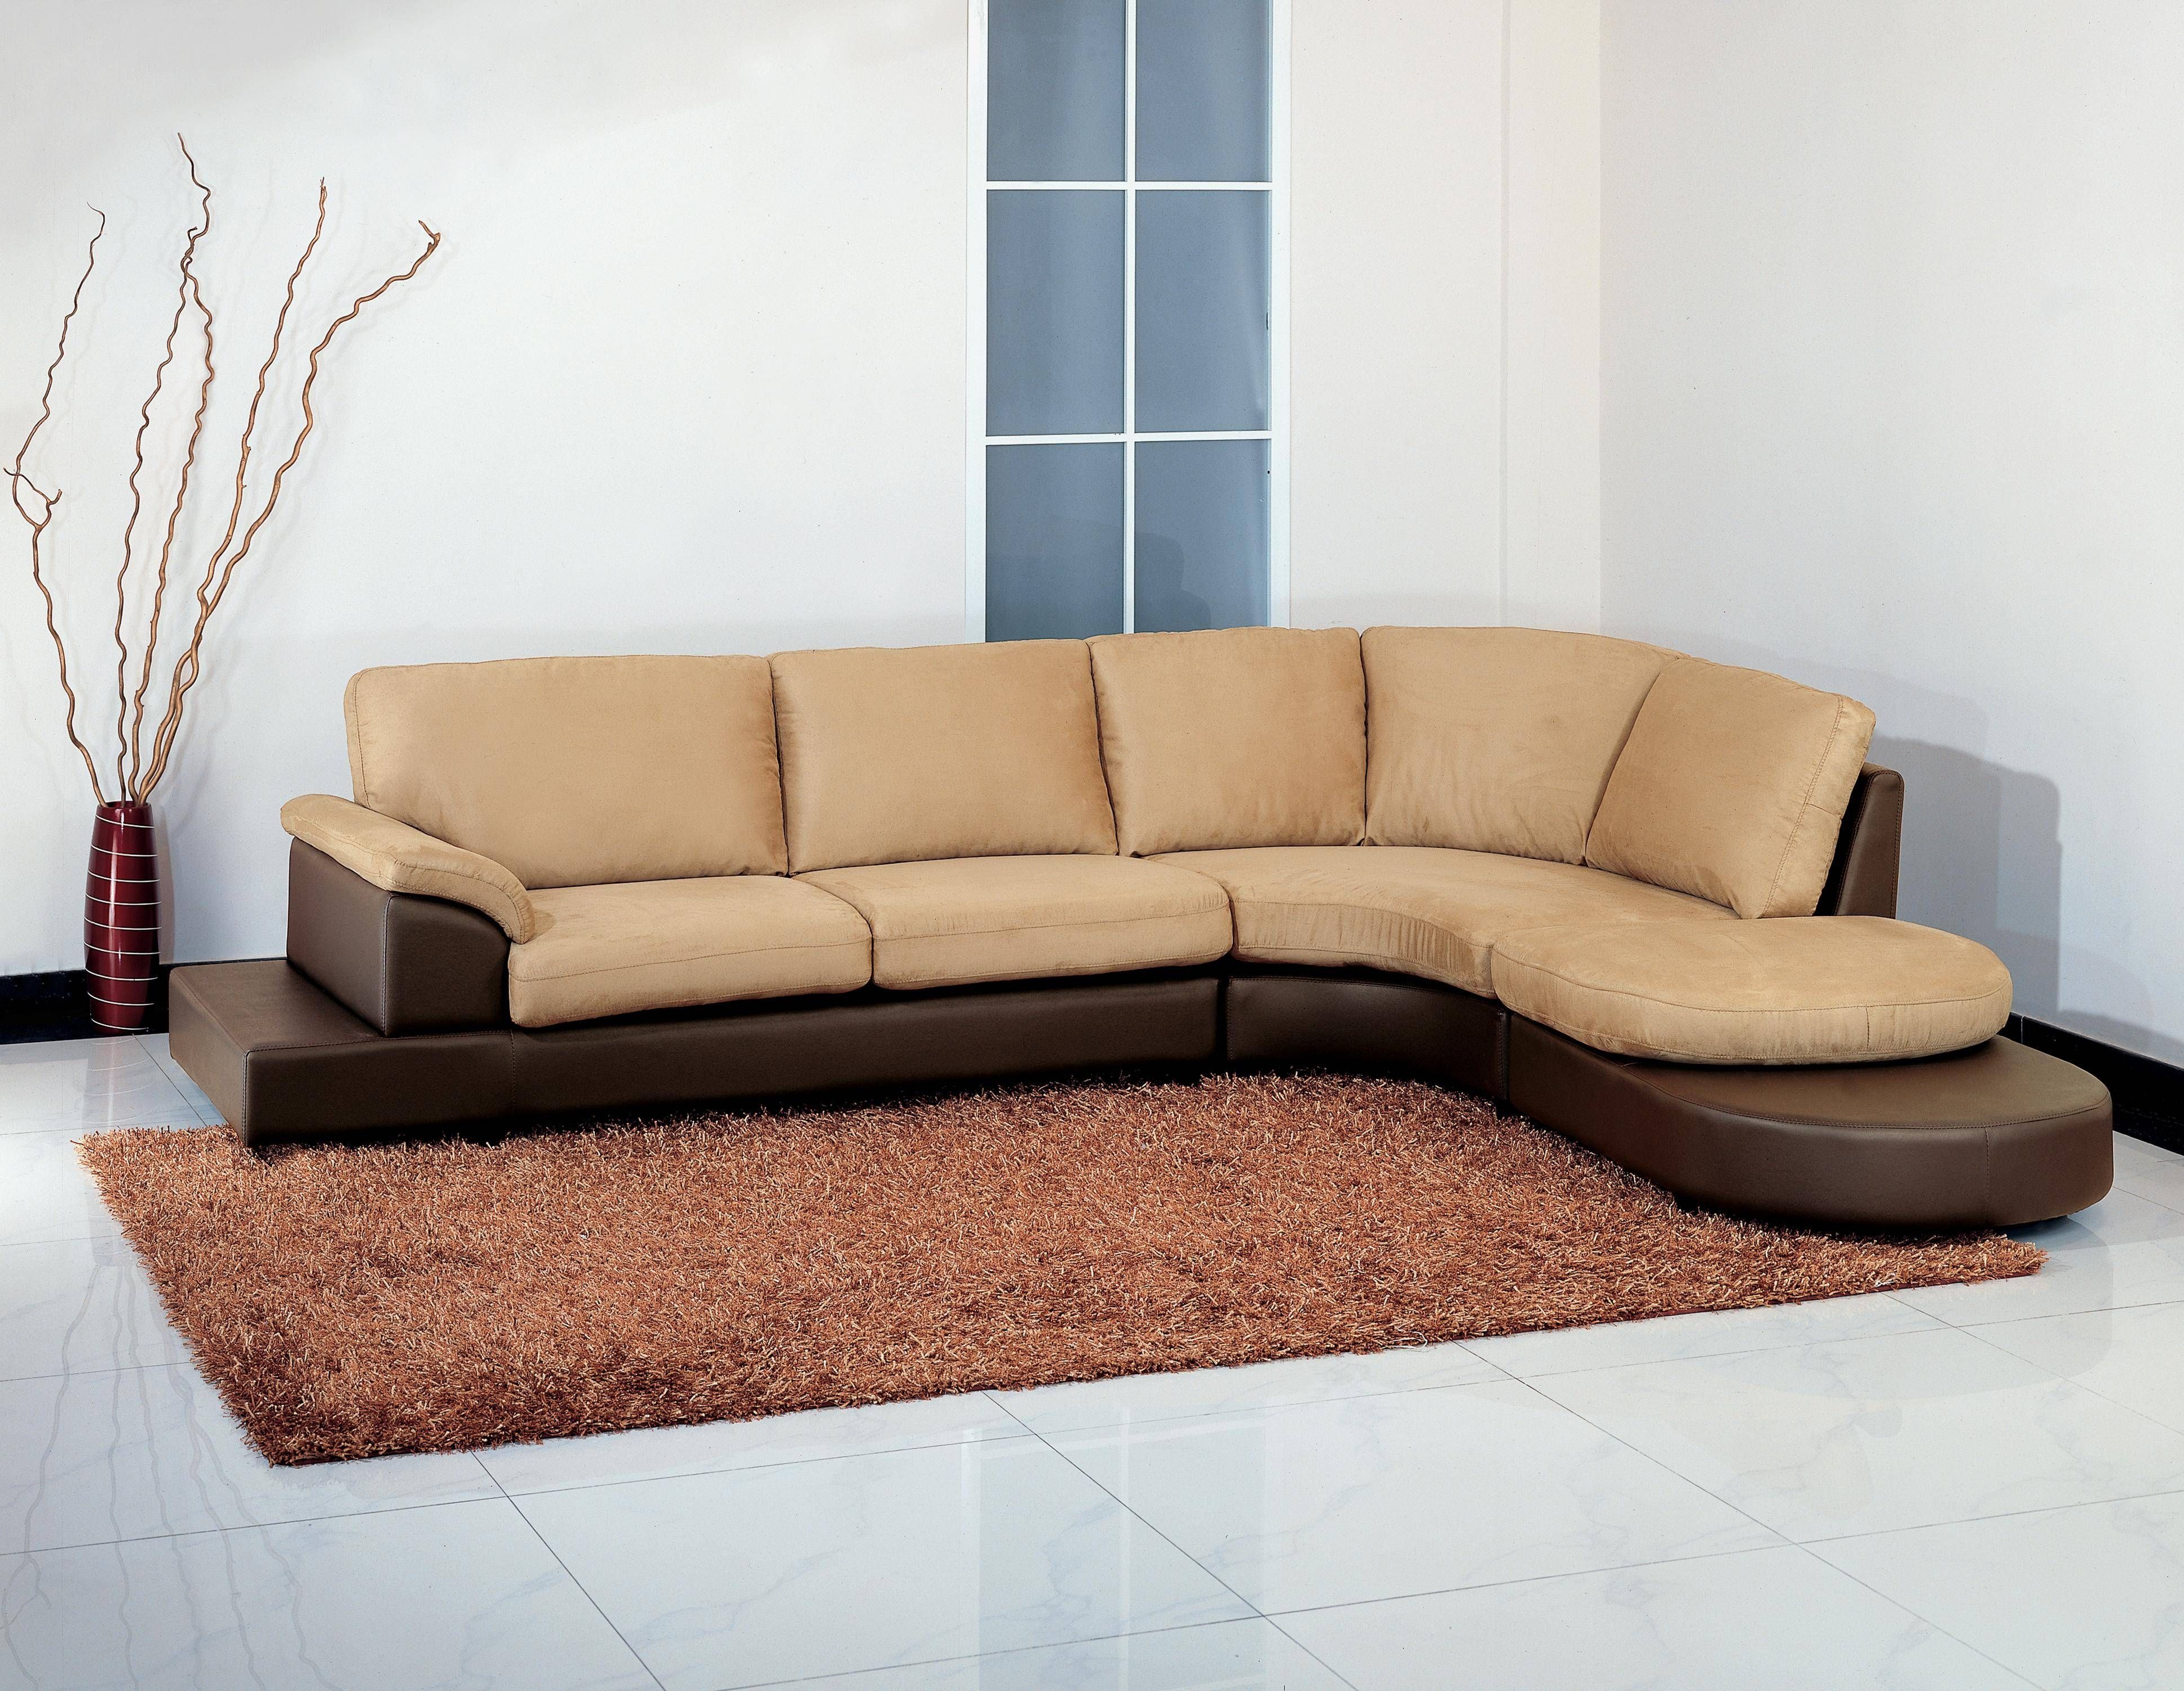 Abbyson Living Charlotte Beige Sectional Sofa And Ottoman Inside Abbyson Sectional Sofas (View 4 of 15)